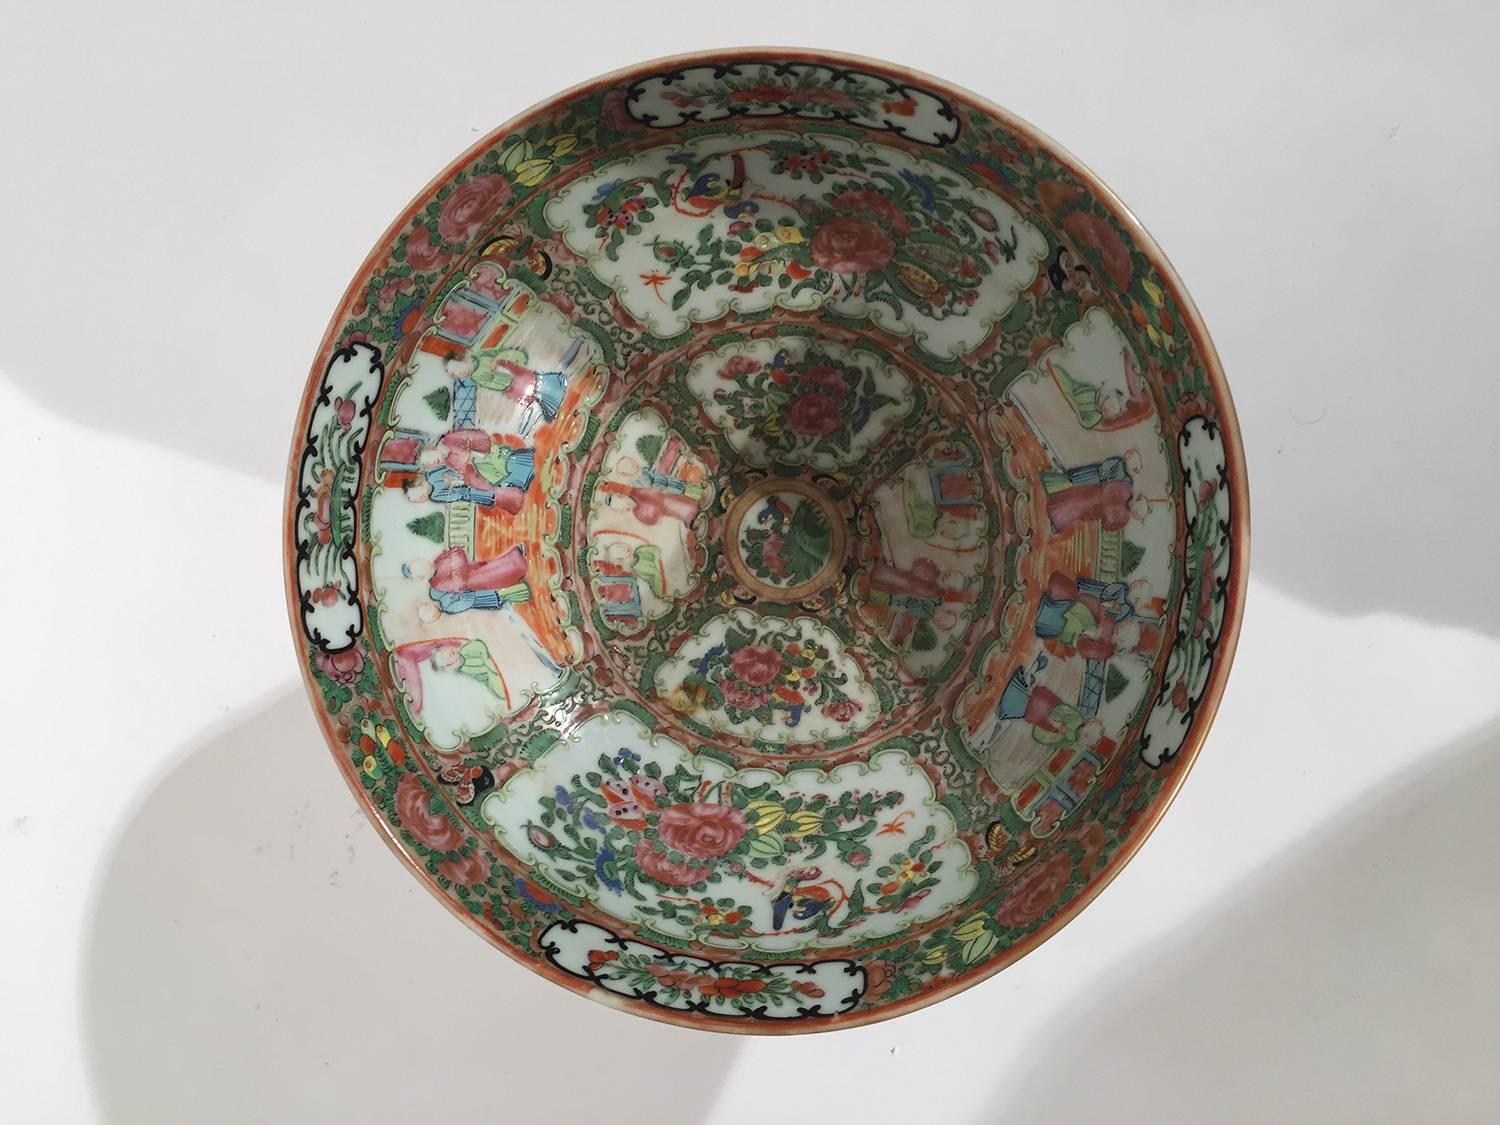 Chinese Export Antique Rose Medallion Bowl on Stand, circa 1880s